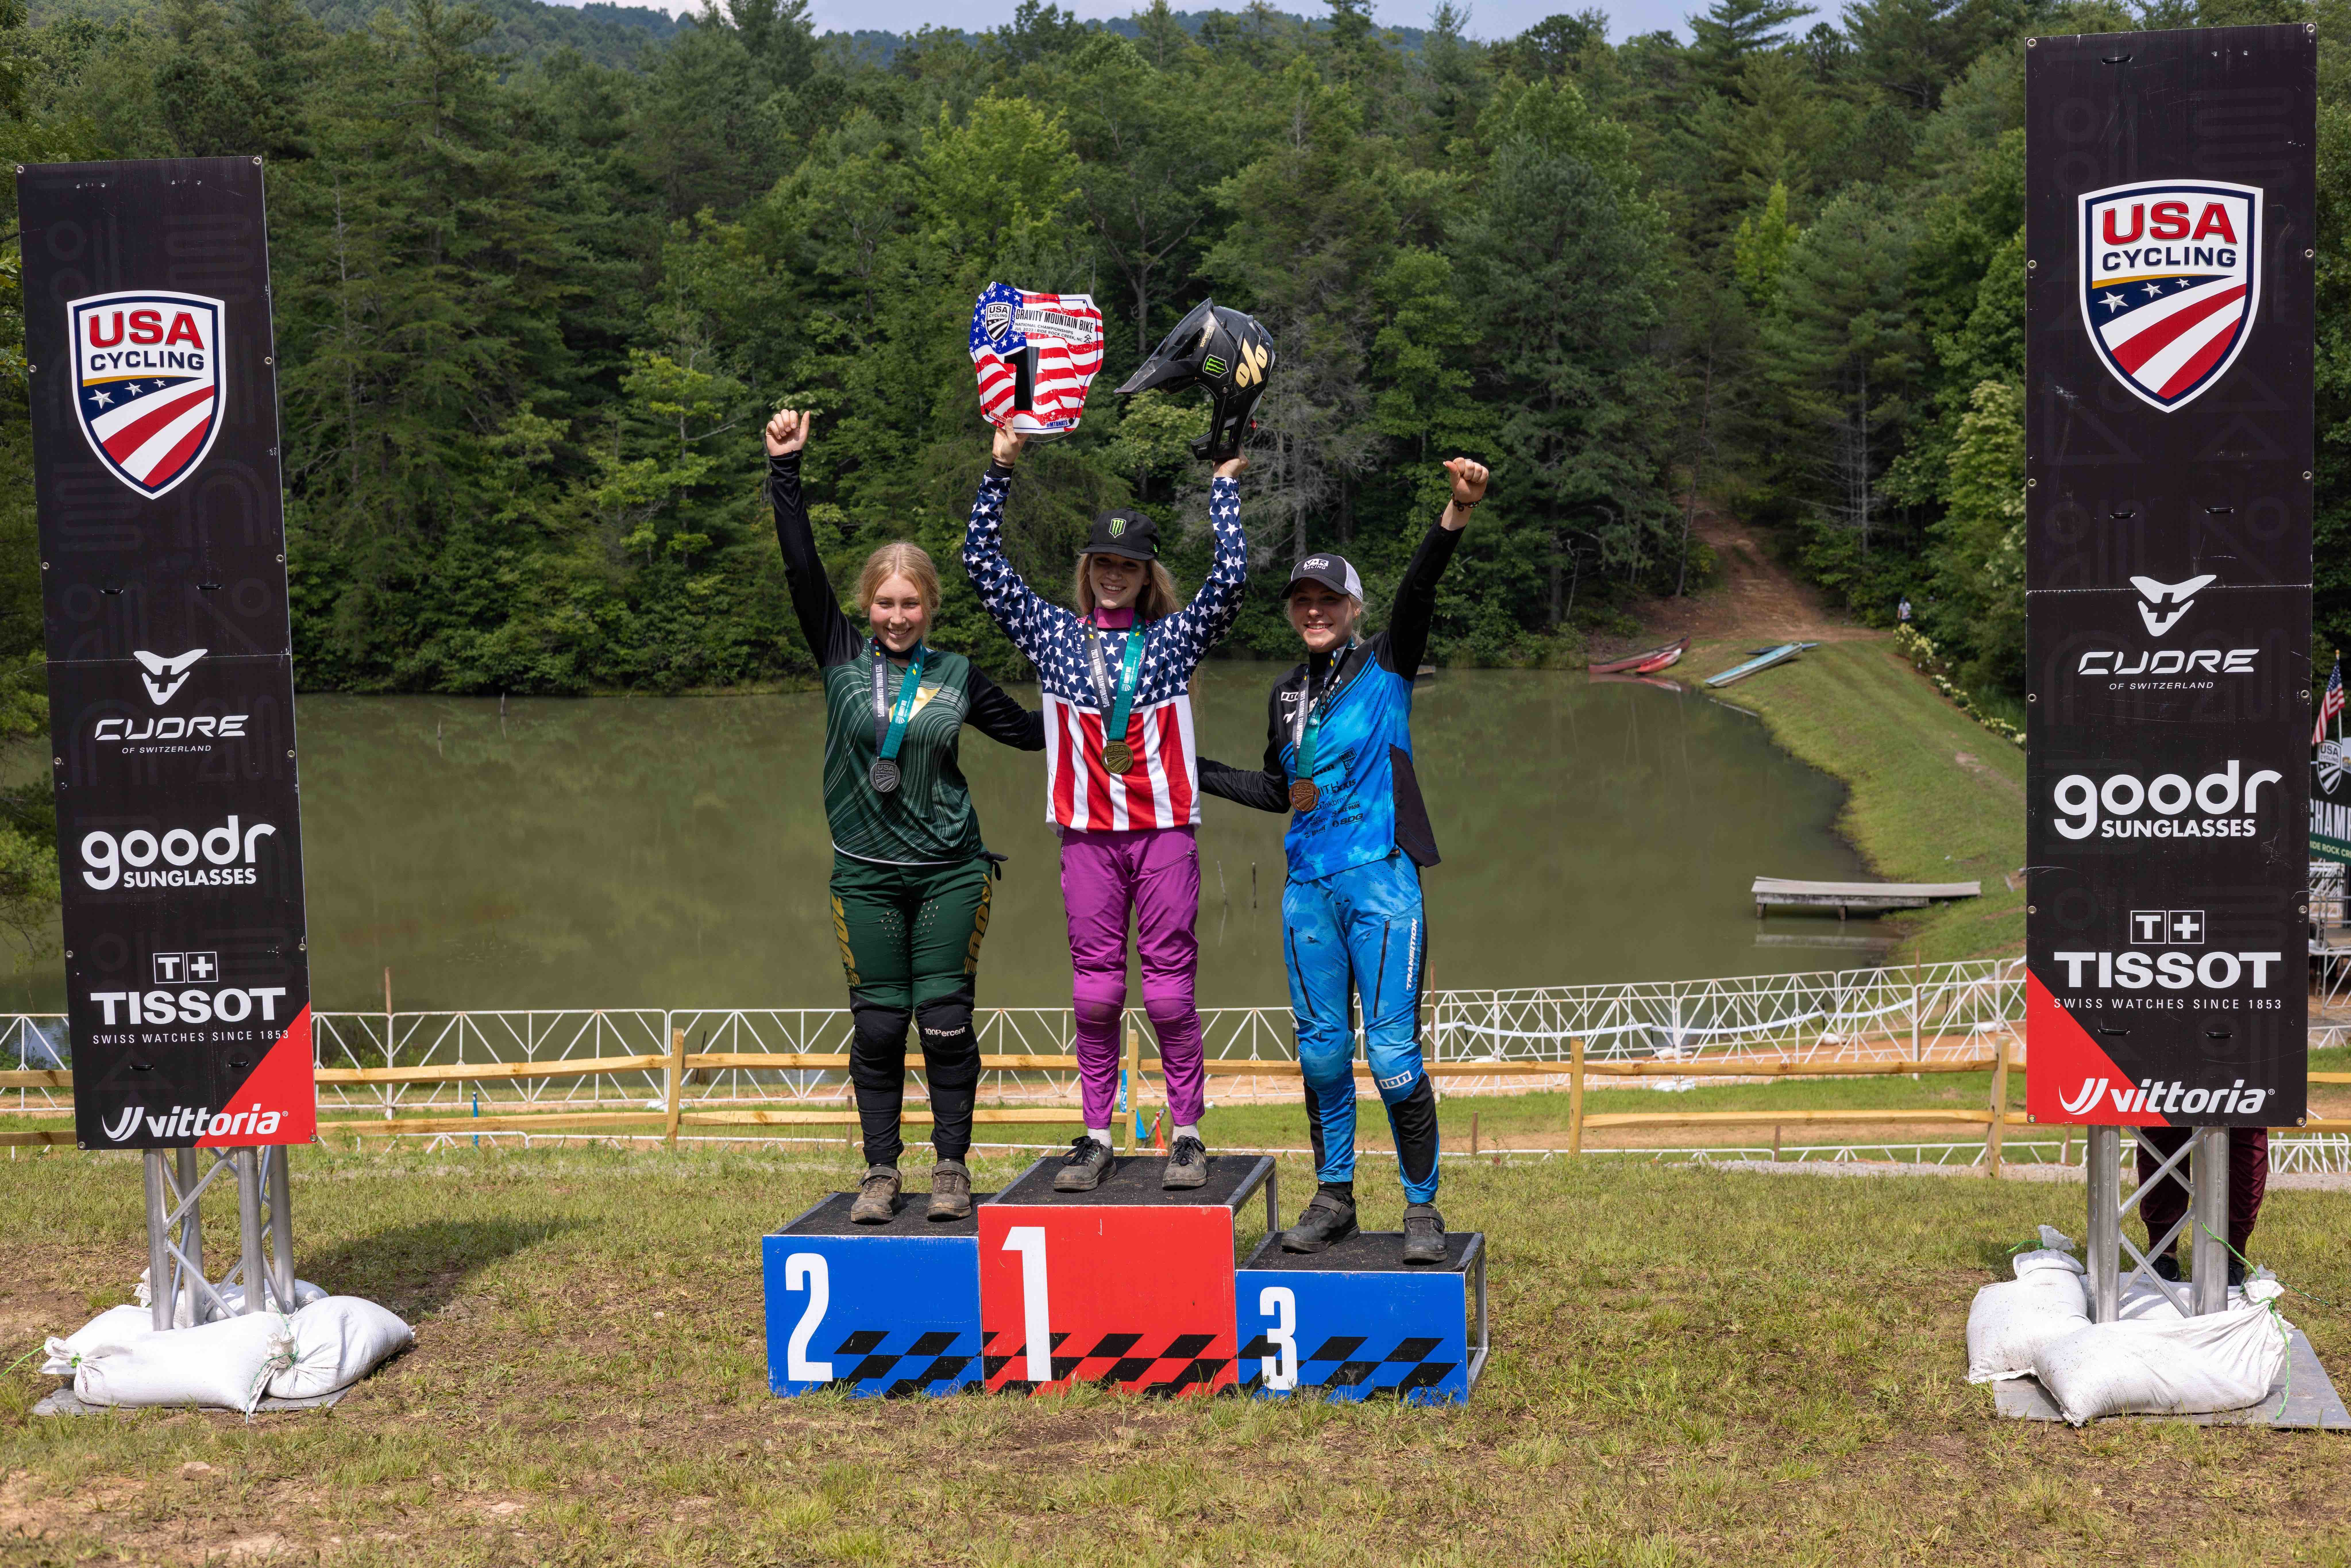 Monster Army’s Kale Cushman wins the Jr. Women’s 17-18 Downhill and also wins the Elite Women’s Dual Slalom at the 2023 USA Gravity Mountain Bike National Championships in Rock Creek, North Carolina